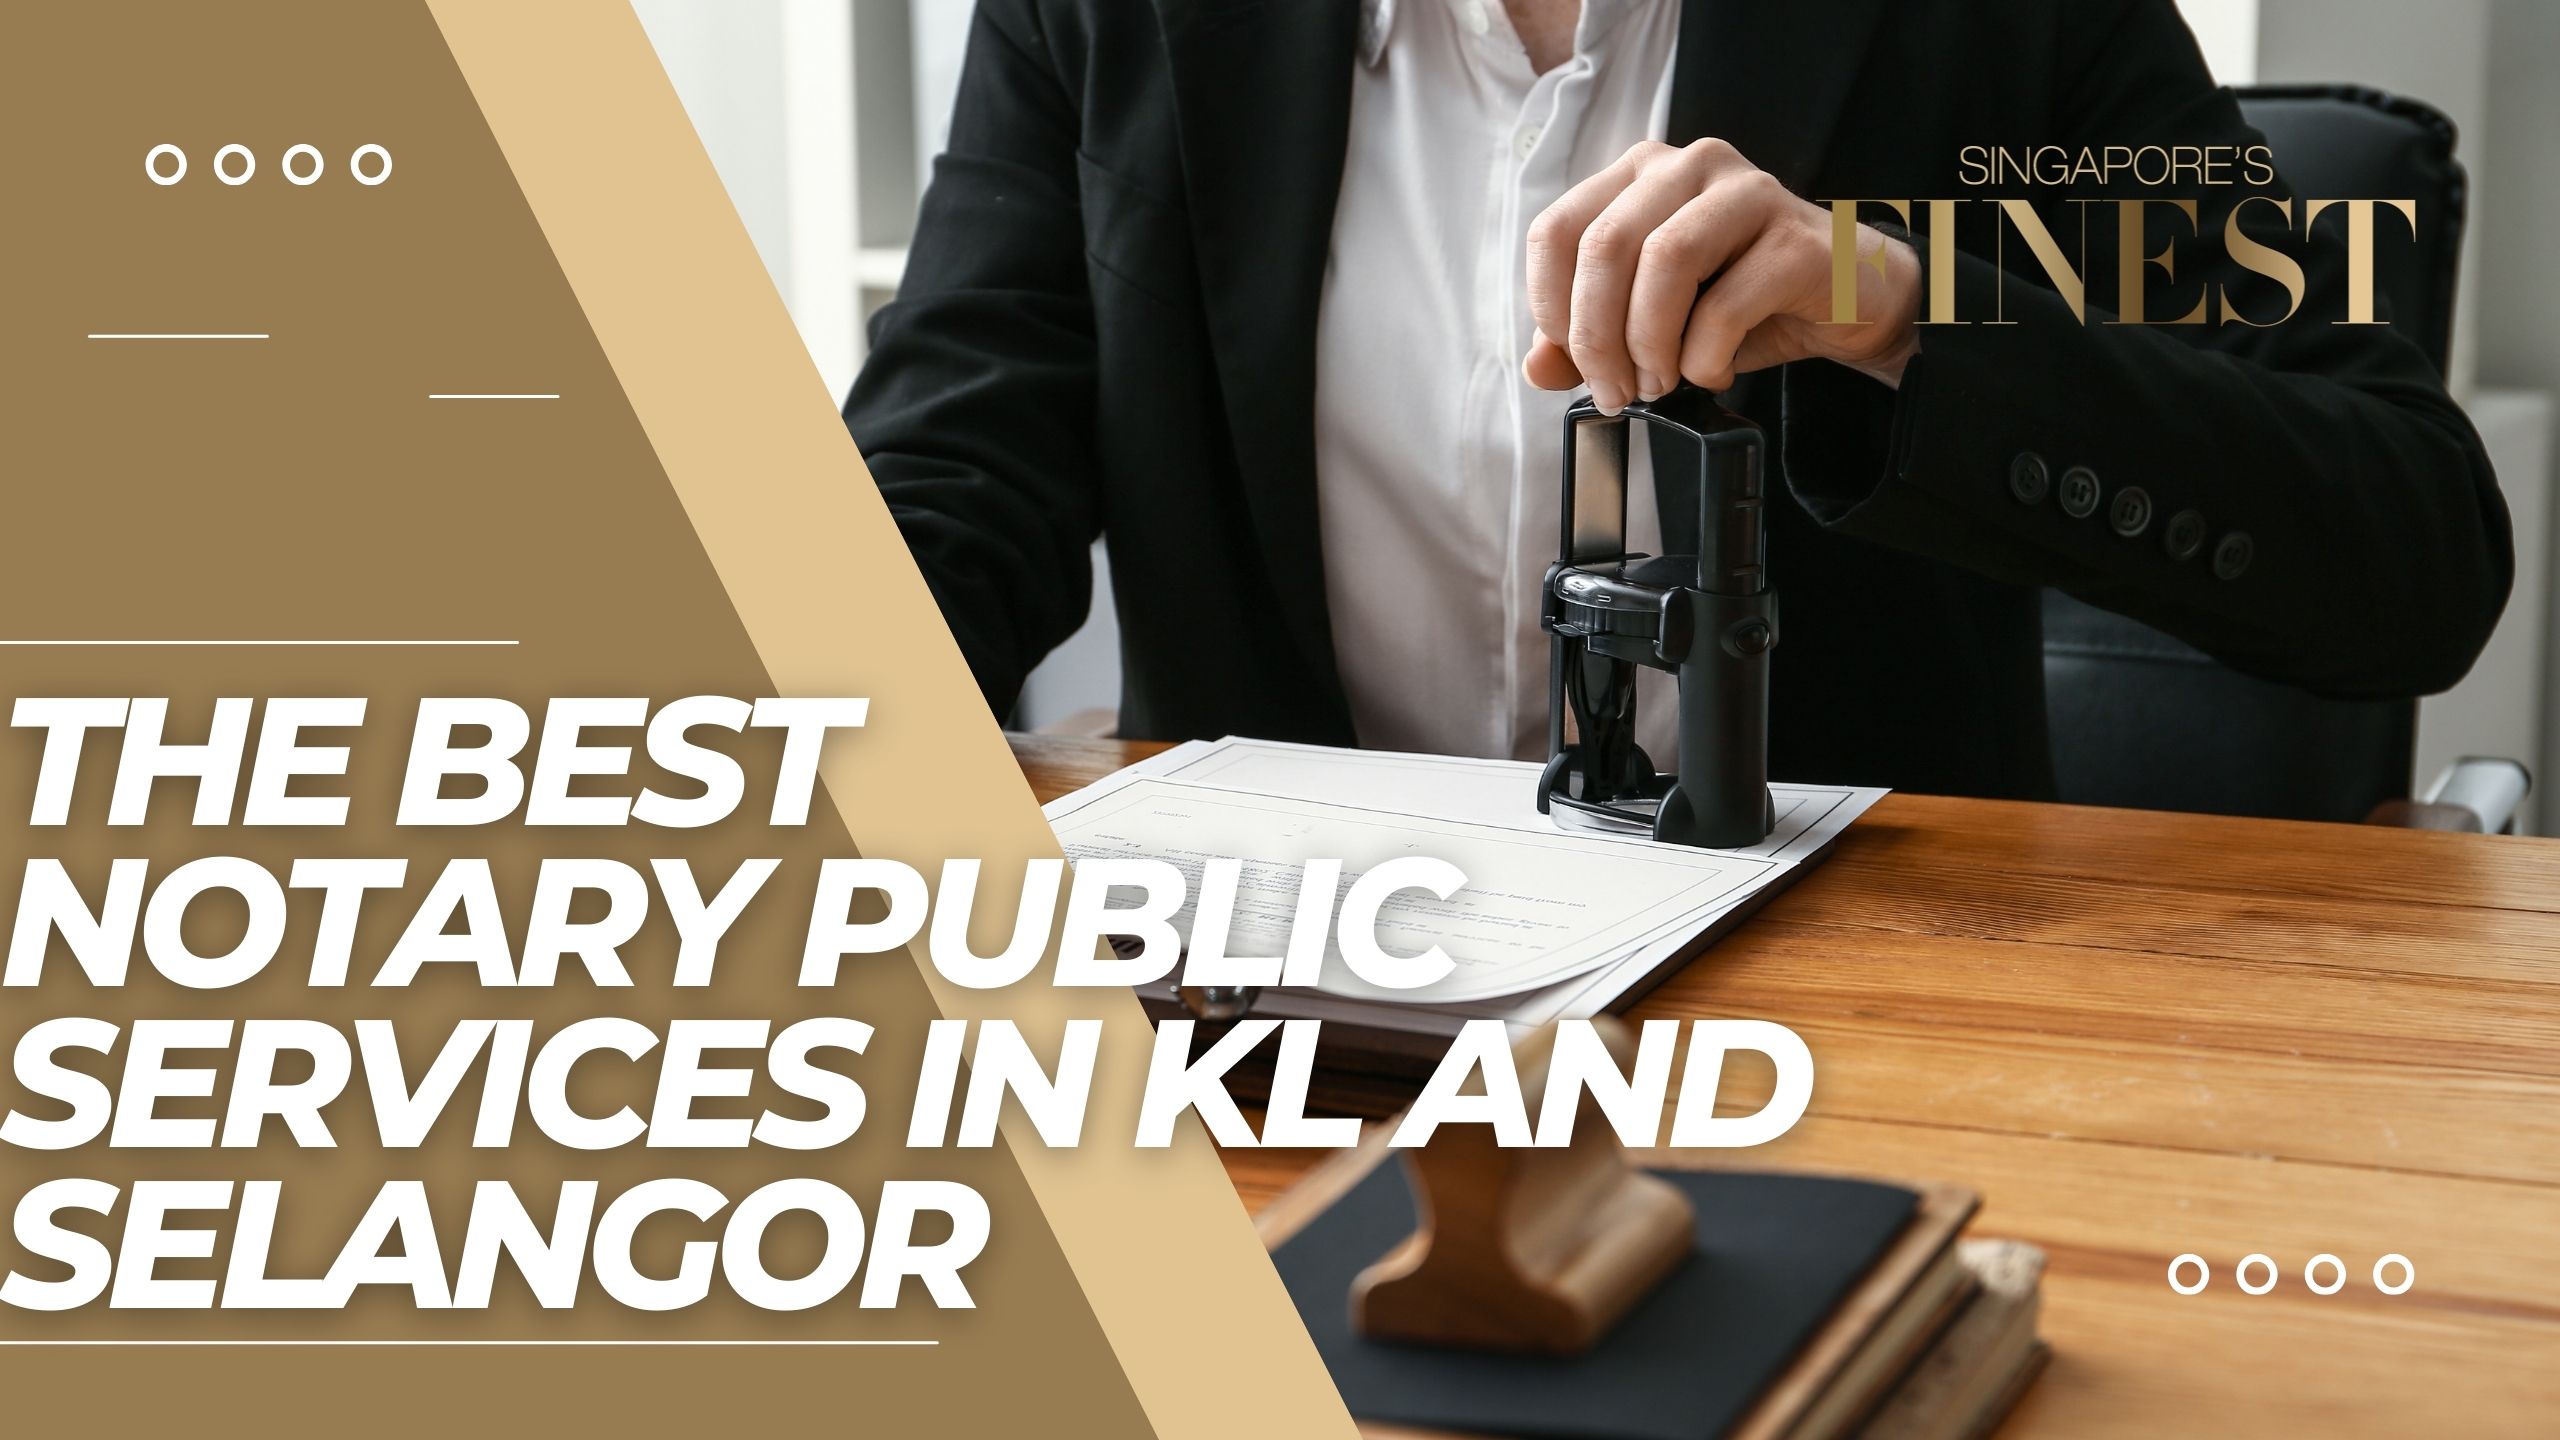 The Finest Notary Public Services in KL and Selangor